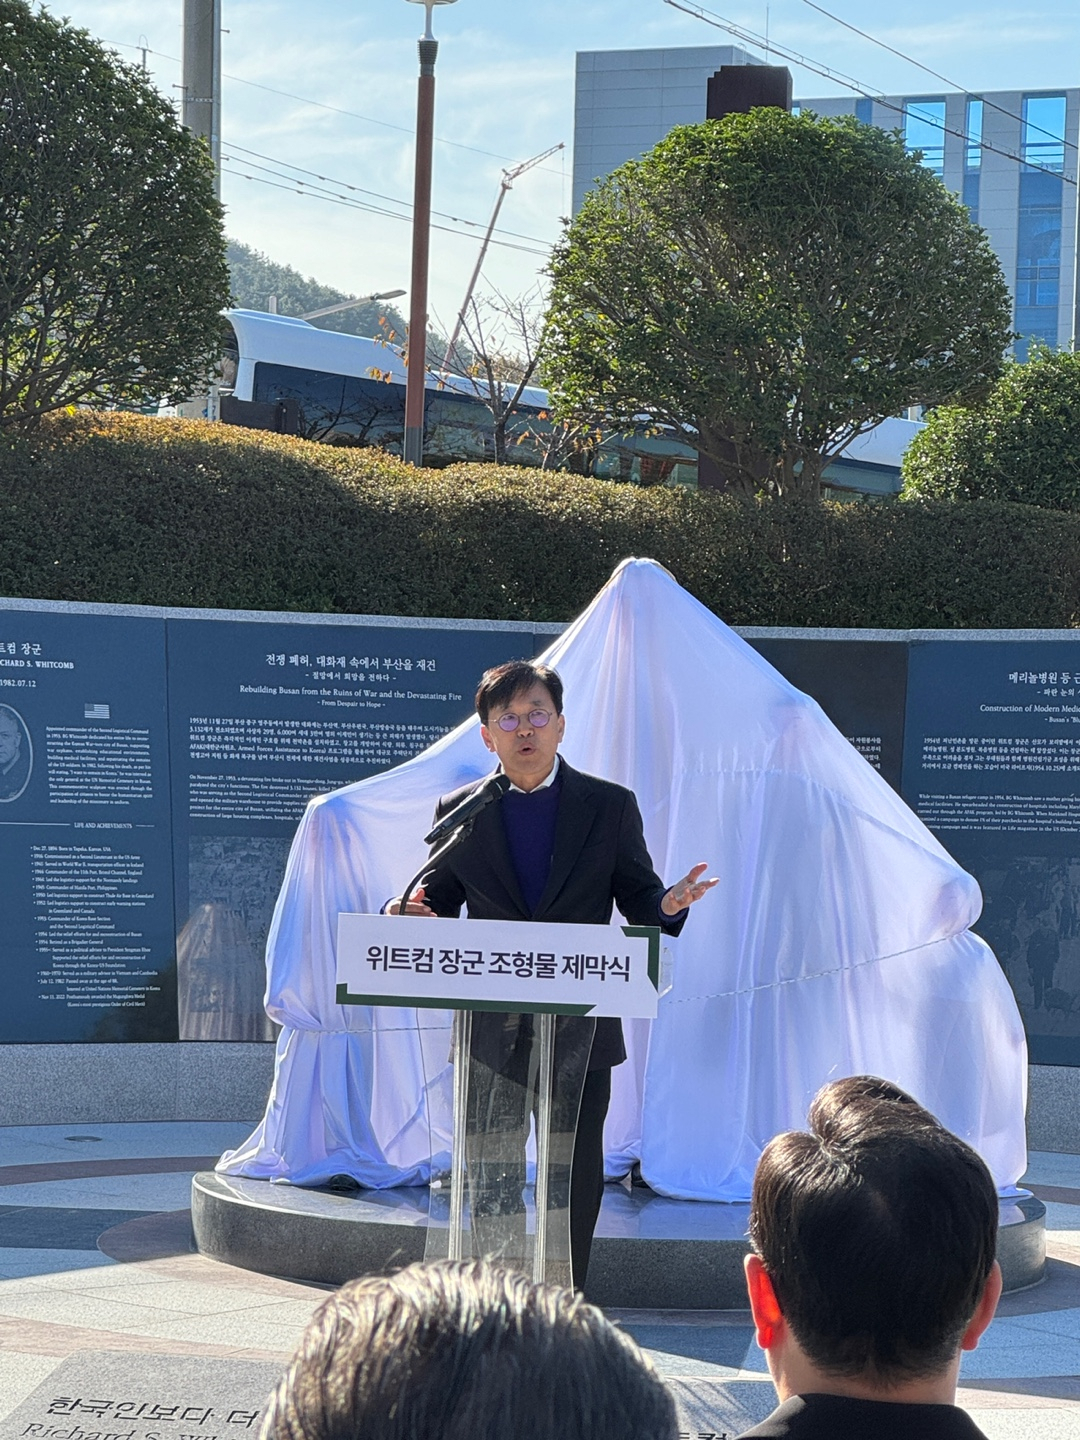 Sculptor Kwon Chi-gyu speaks during the unveiling ceremony of 